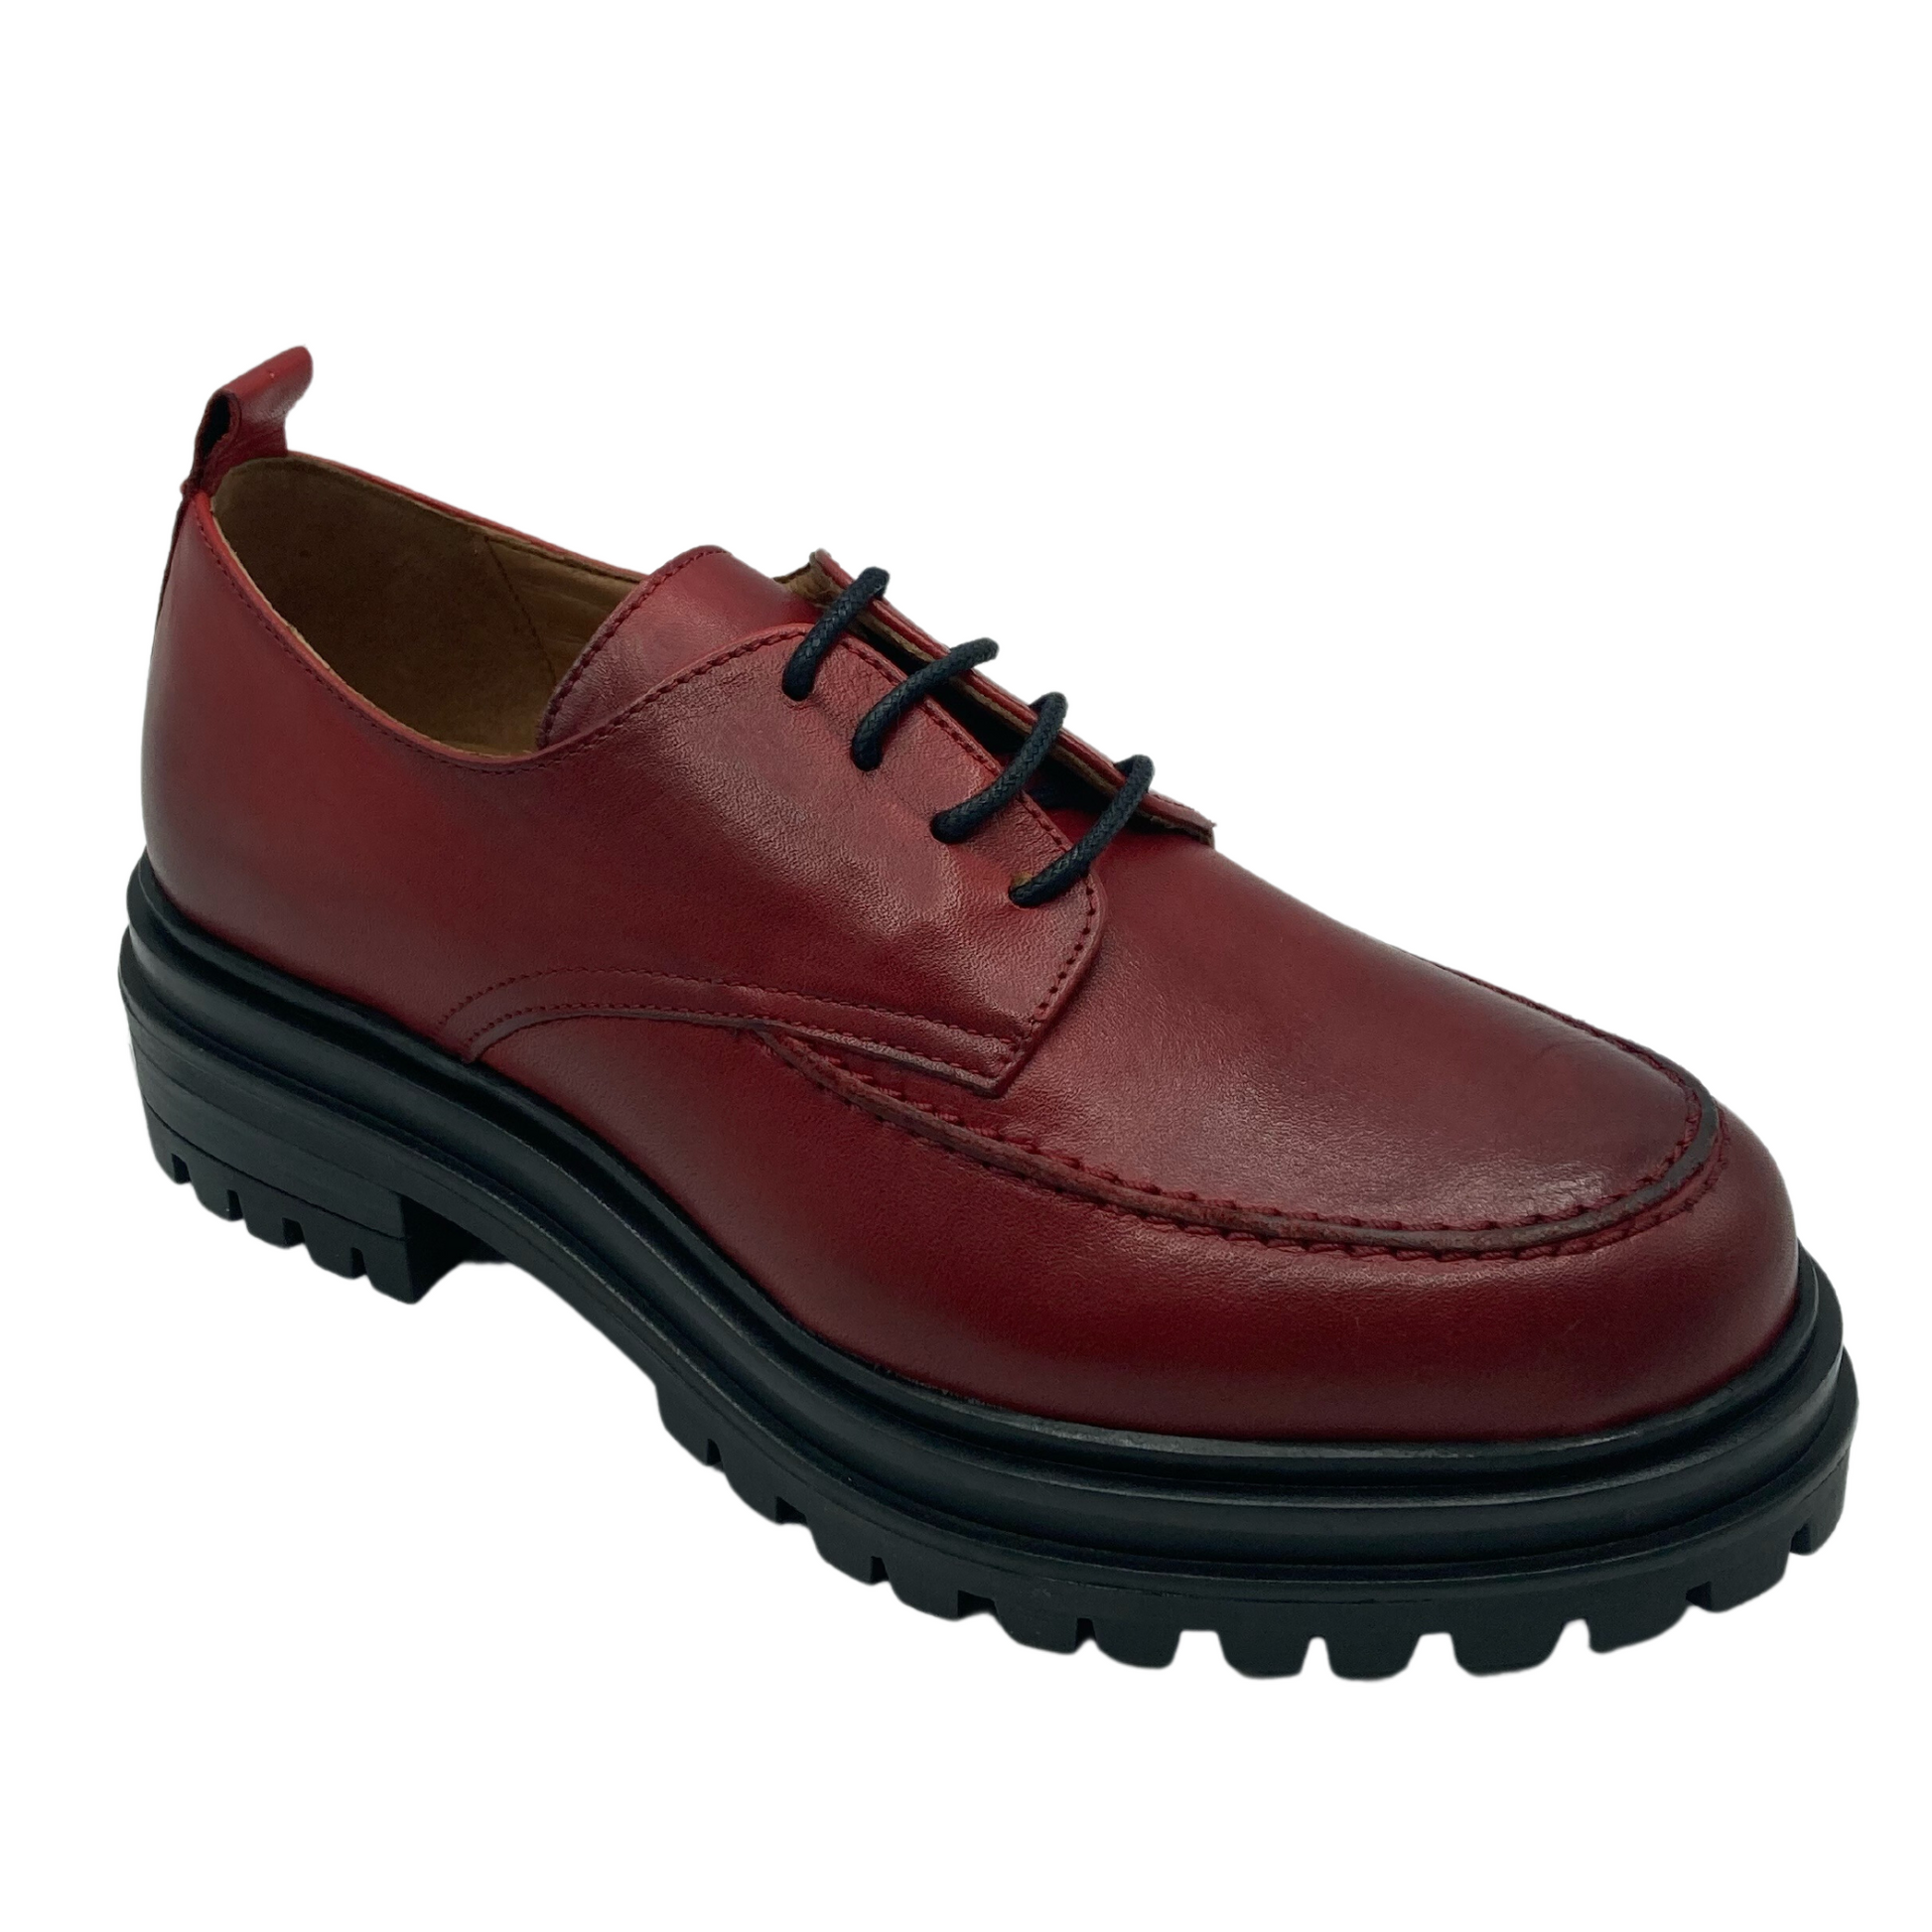 45 degree angled view of red leather loafer with black rubber sole and skinny black laces